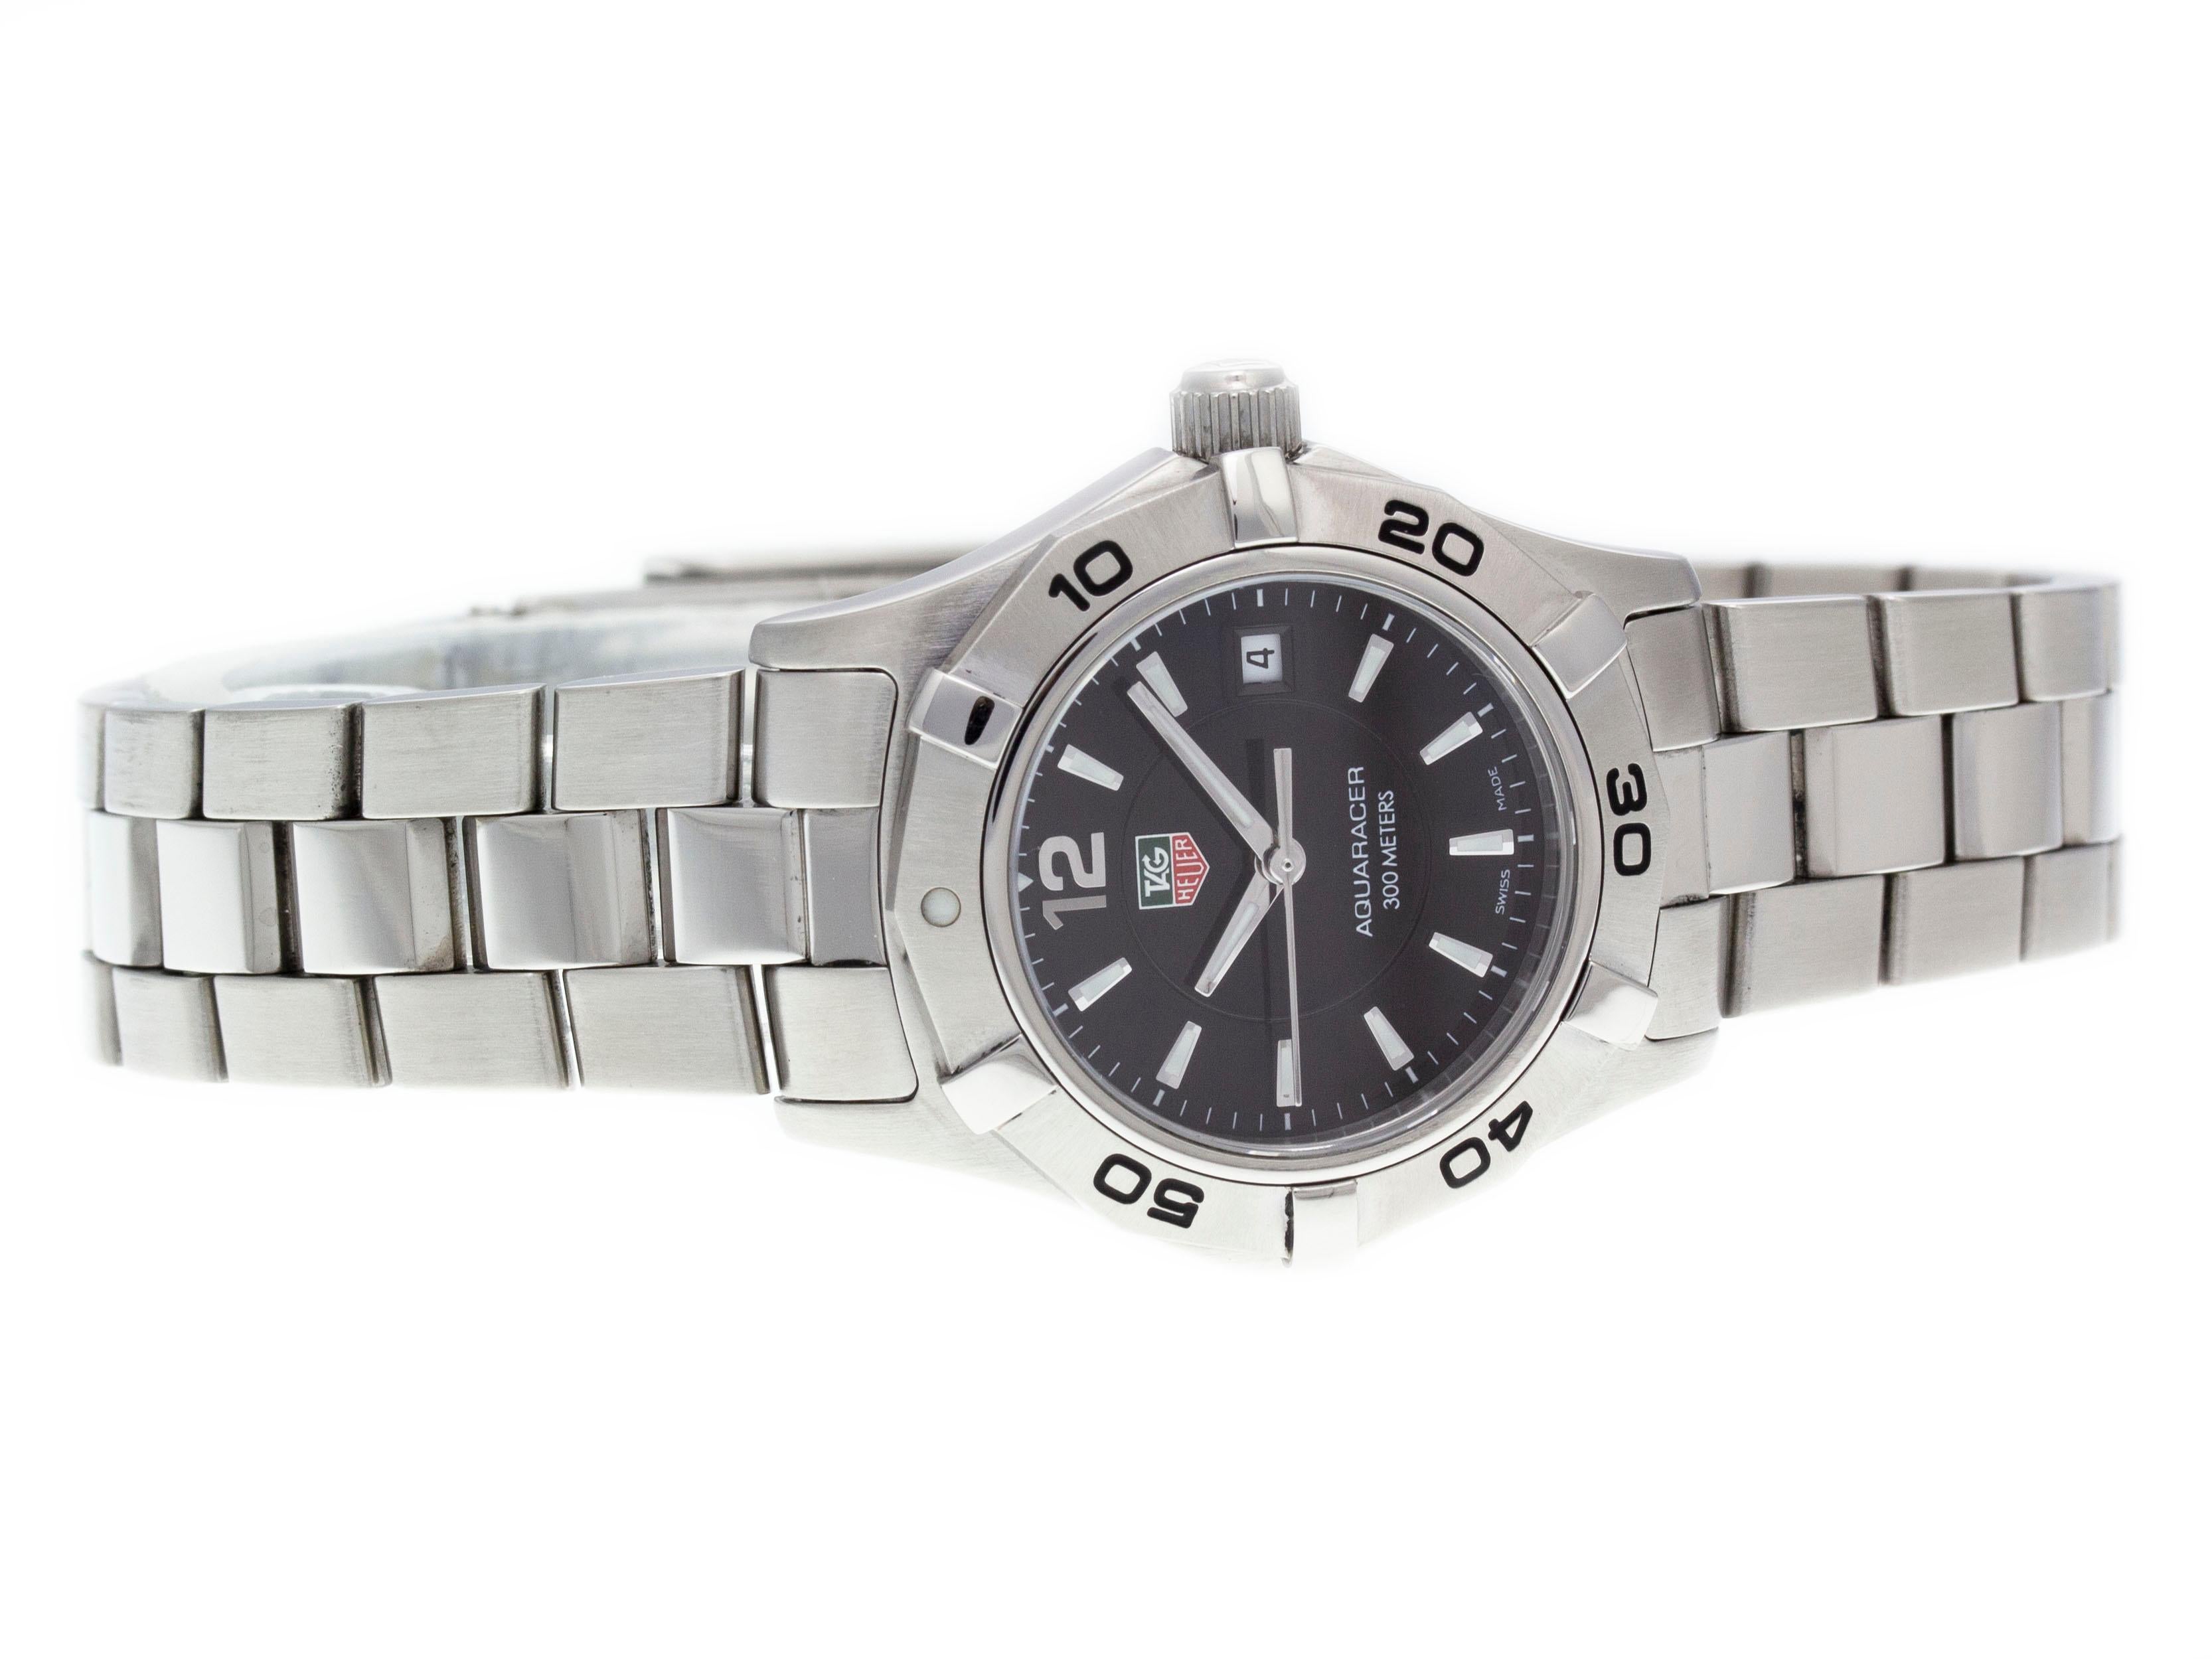 Tag Heuer Aquaracer WAF1410.BA0823 In Excellent Condition For Sale In Willow Grove, PA